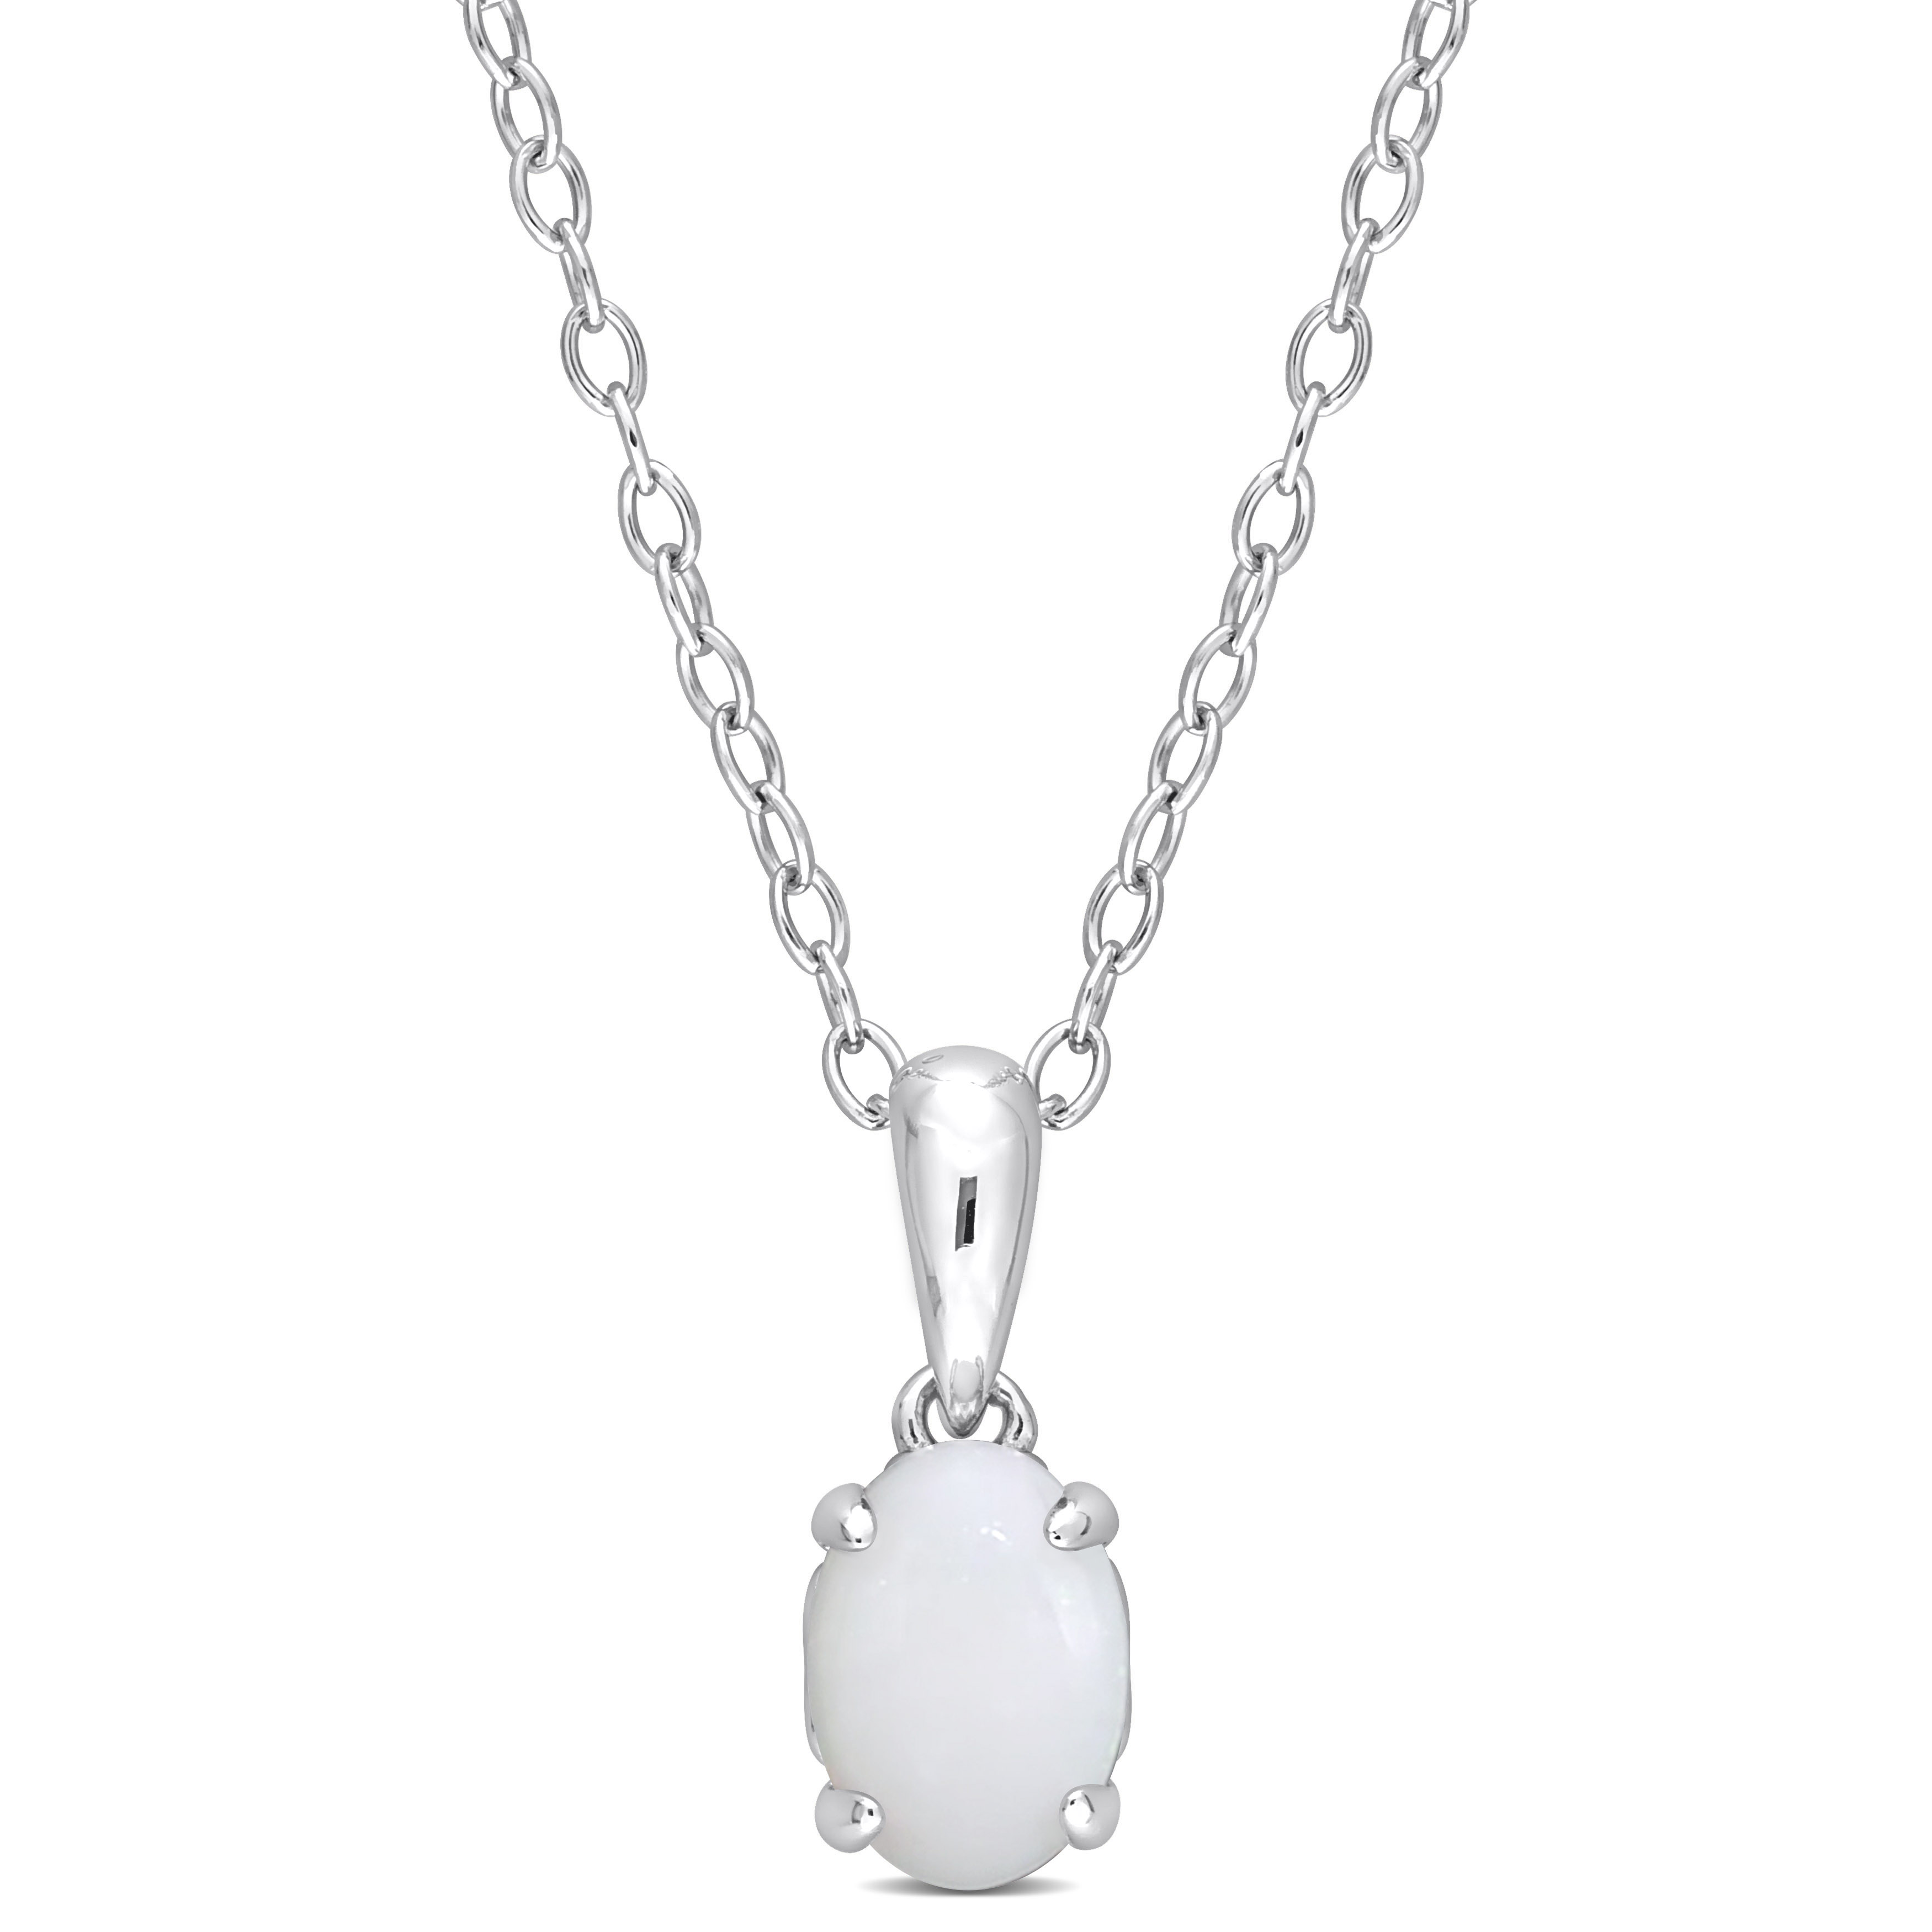 1/2 CT TGW Oval Opal Solitaire Heart Design Pendant with Chain in Sterling Silver - 18 in.